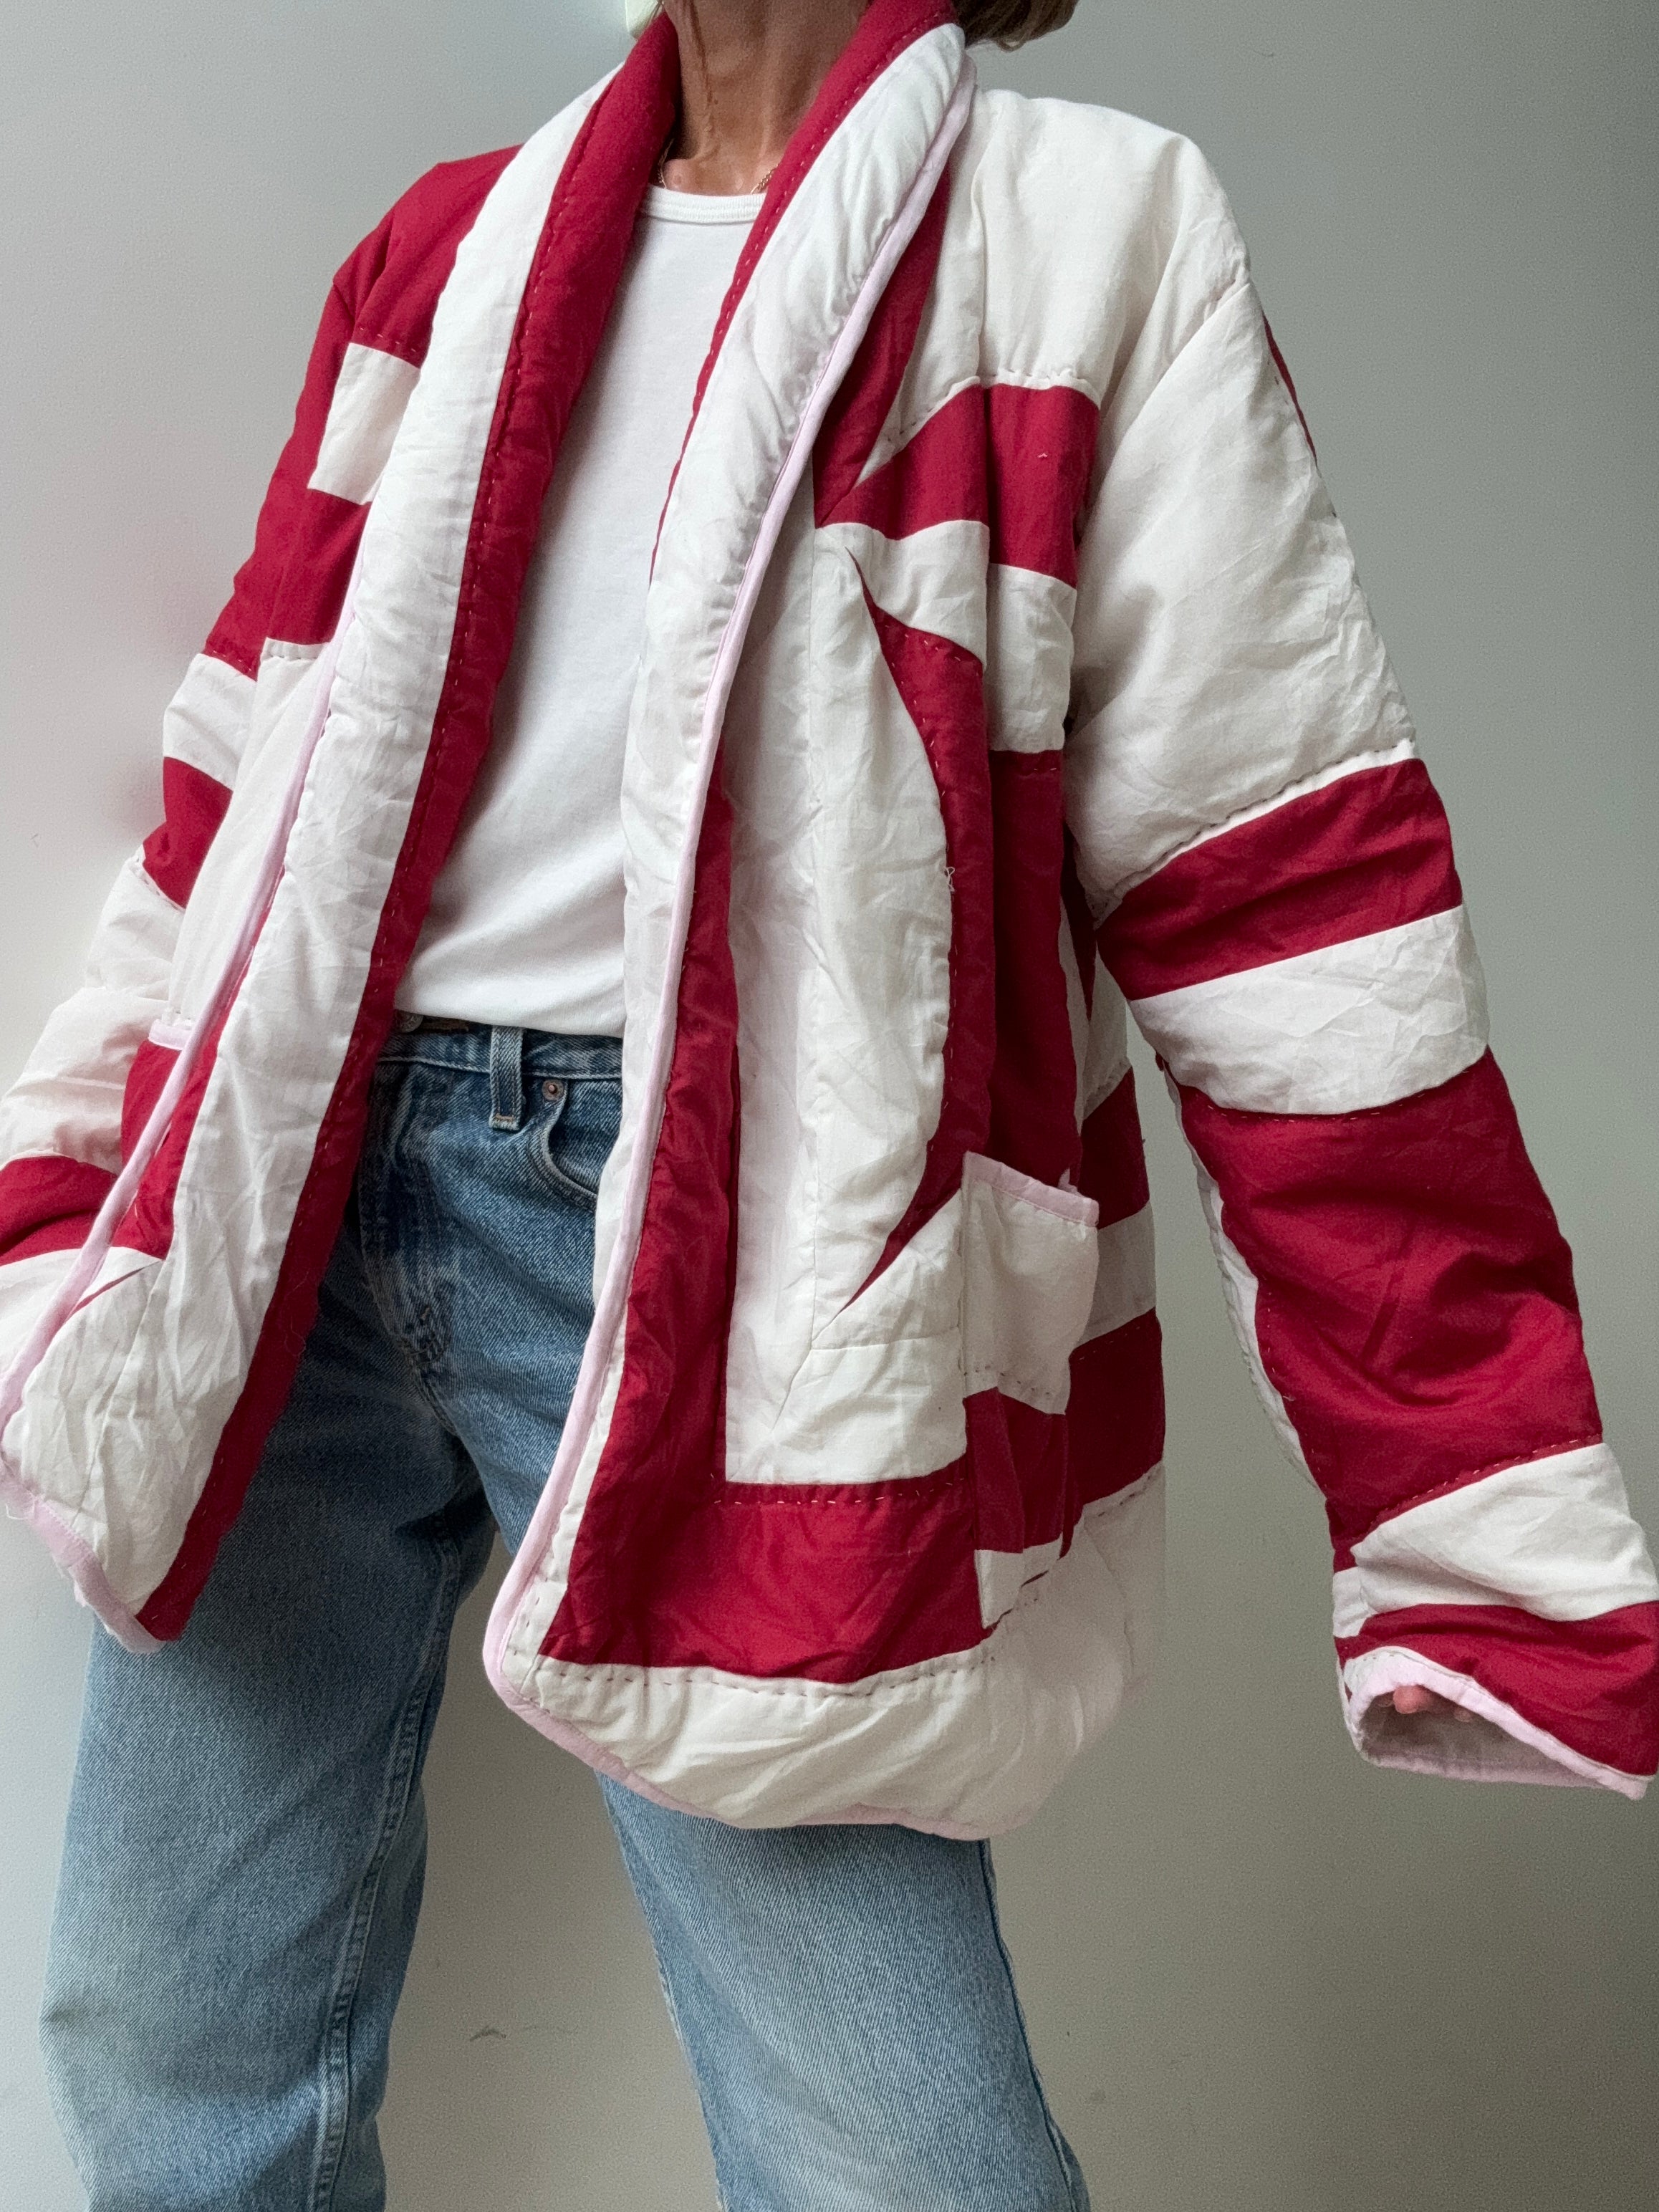 Future Nomads Jackets Free Size / Red Upcycled Quilt Jacket Red White